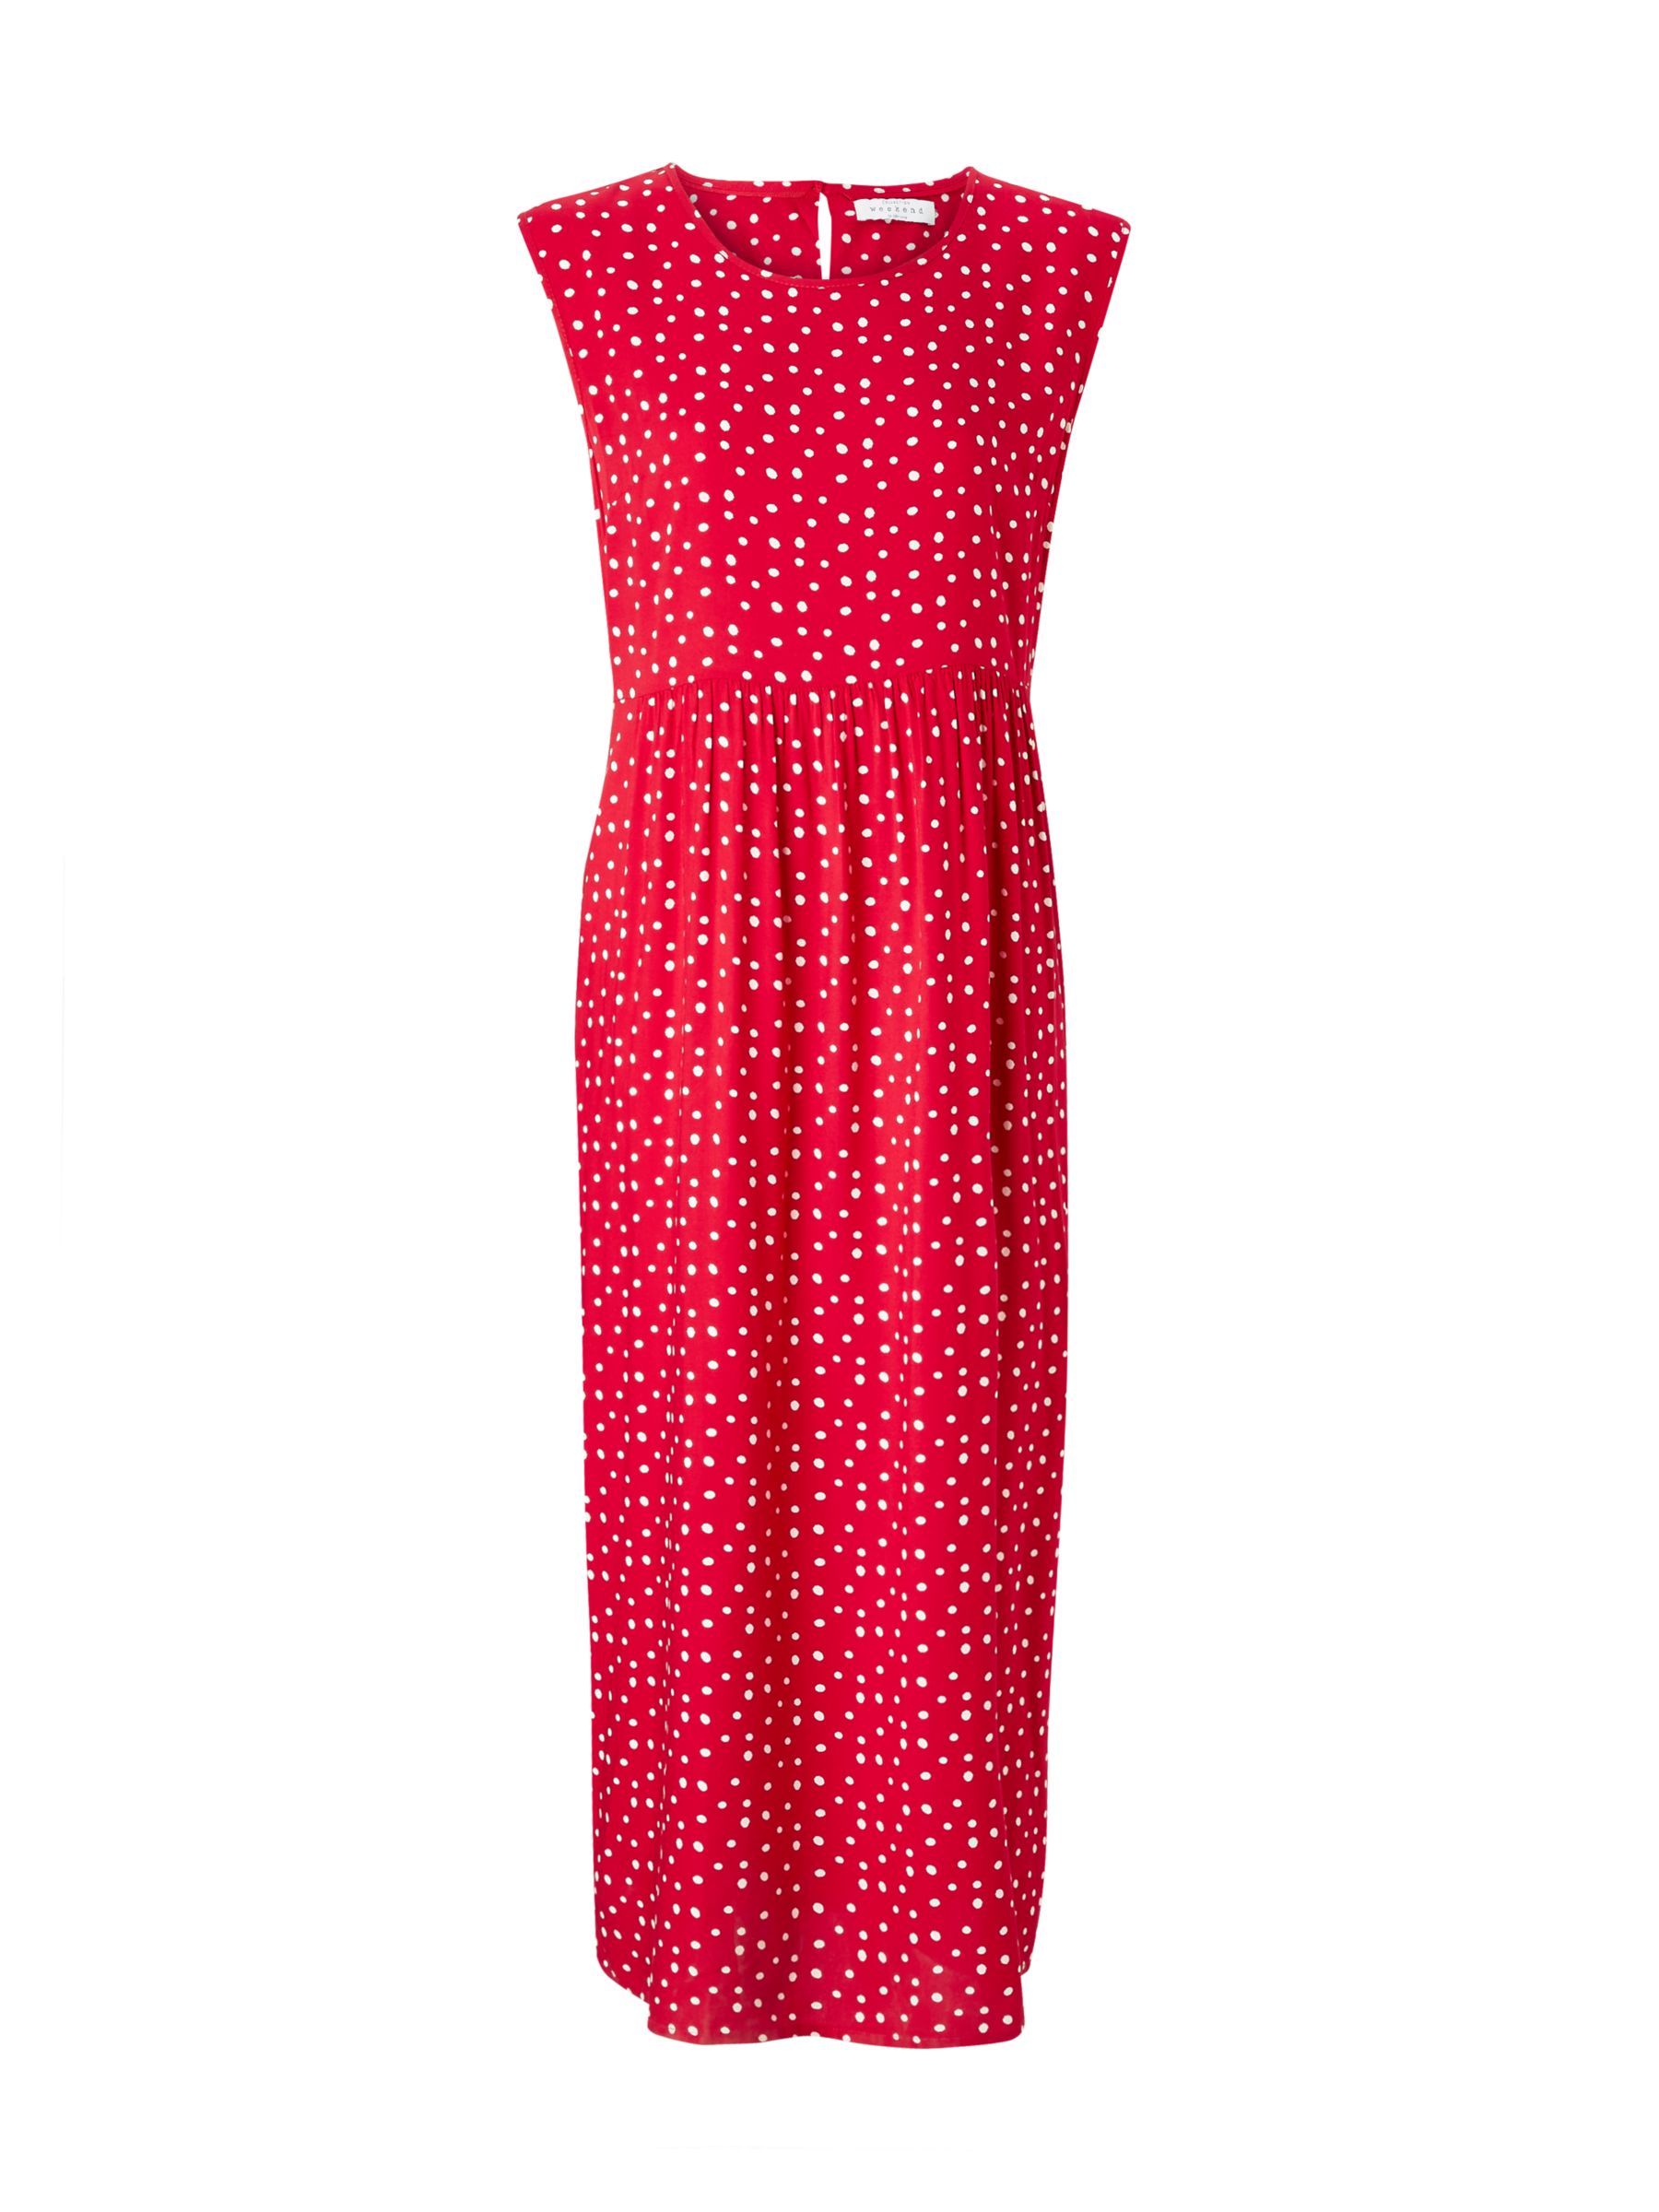 Collection WEEKEND by John Lewis Sleeveless Polka Dot Dress, Red/White